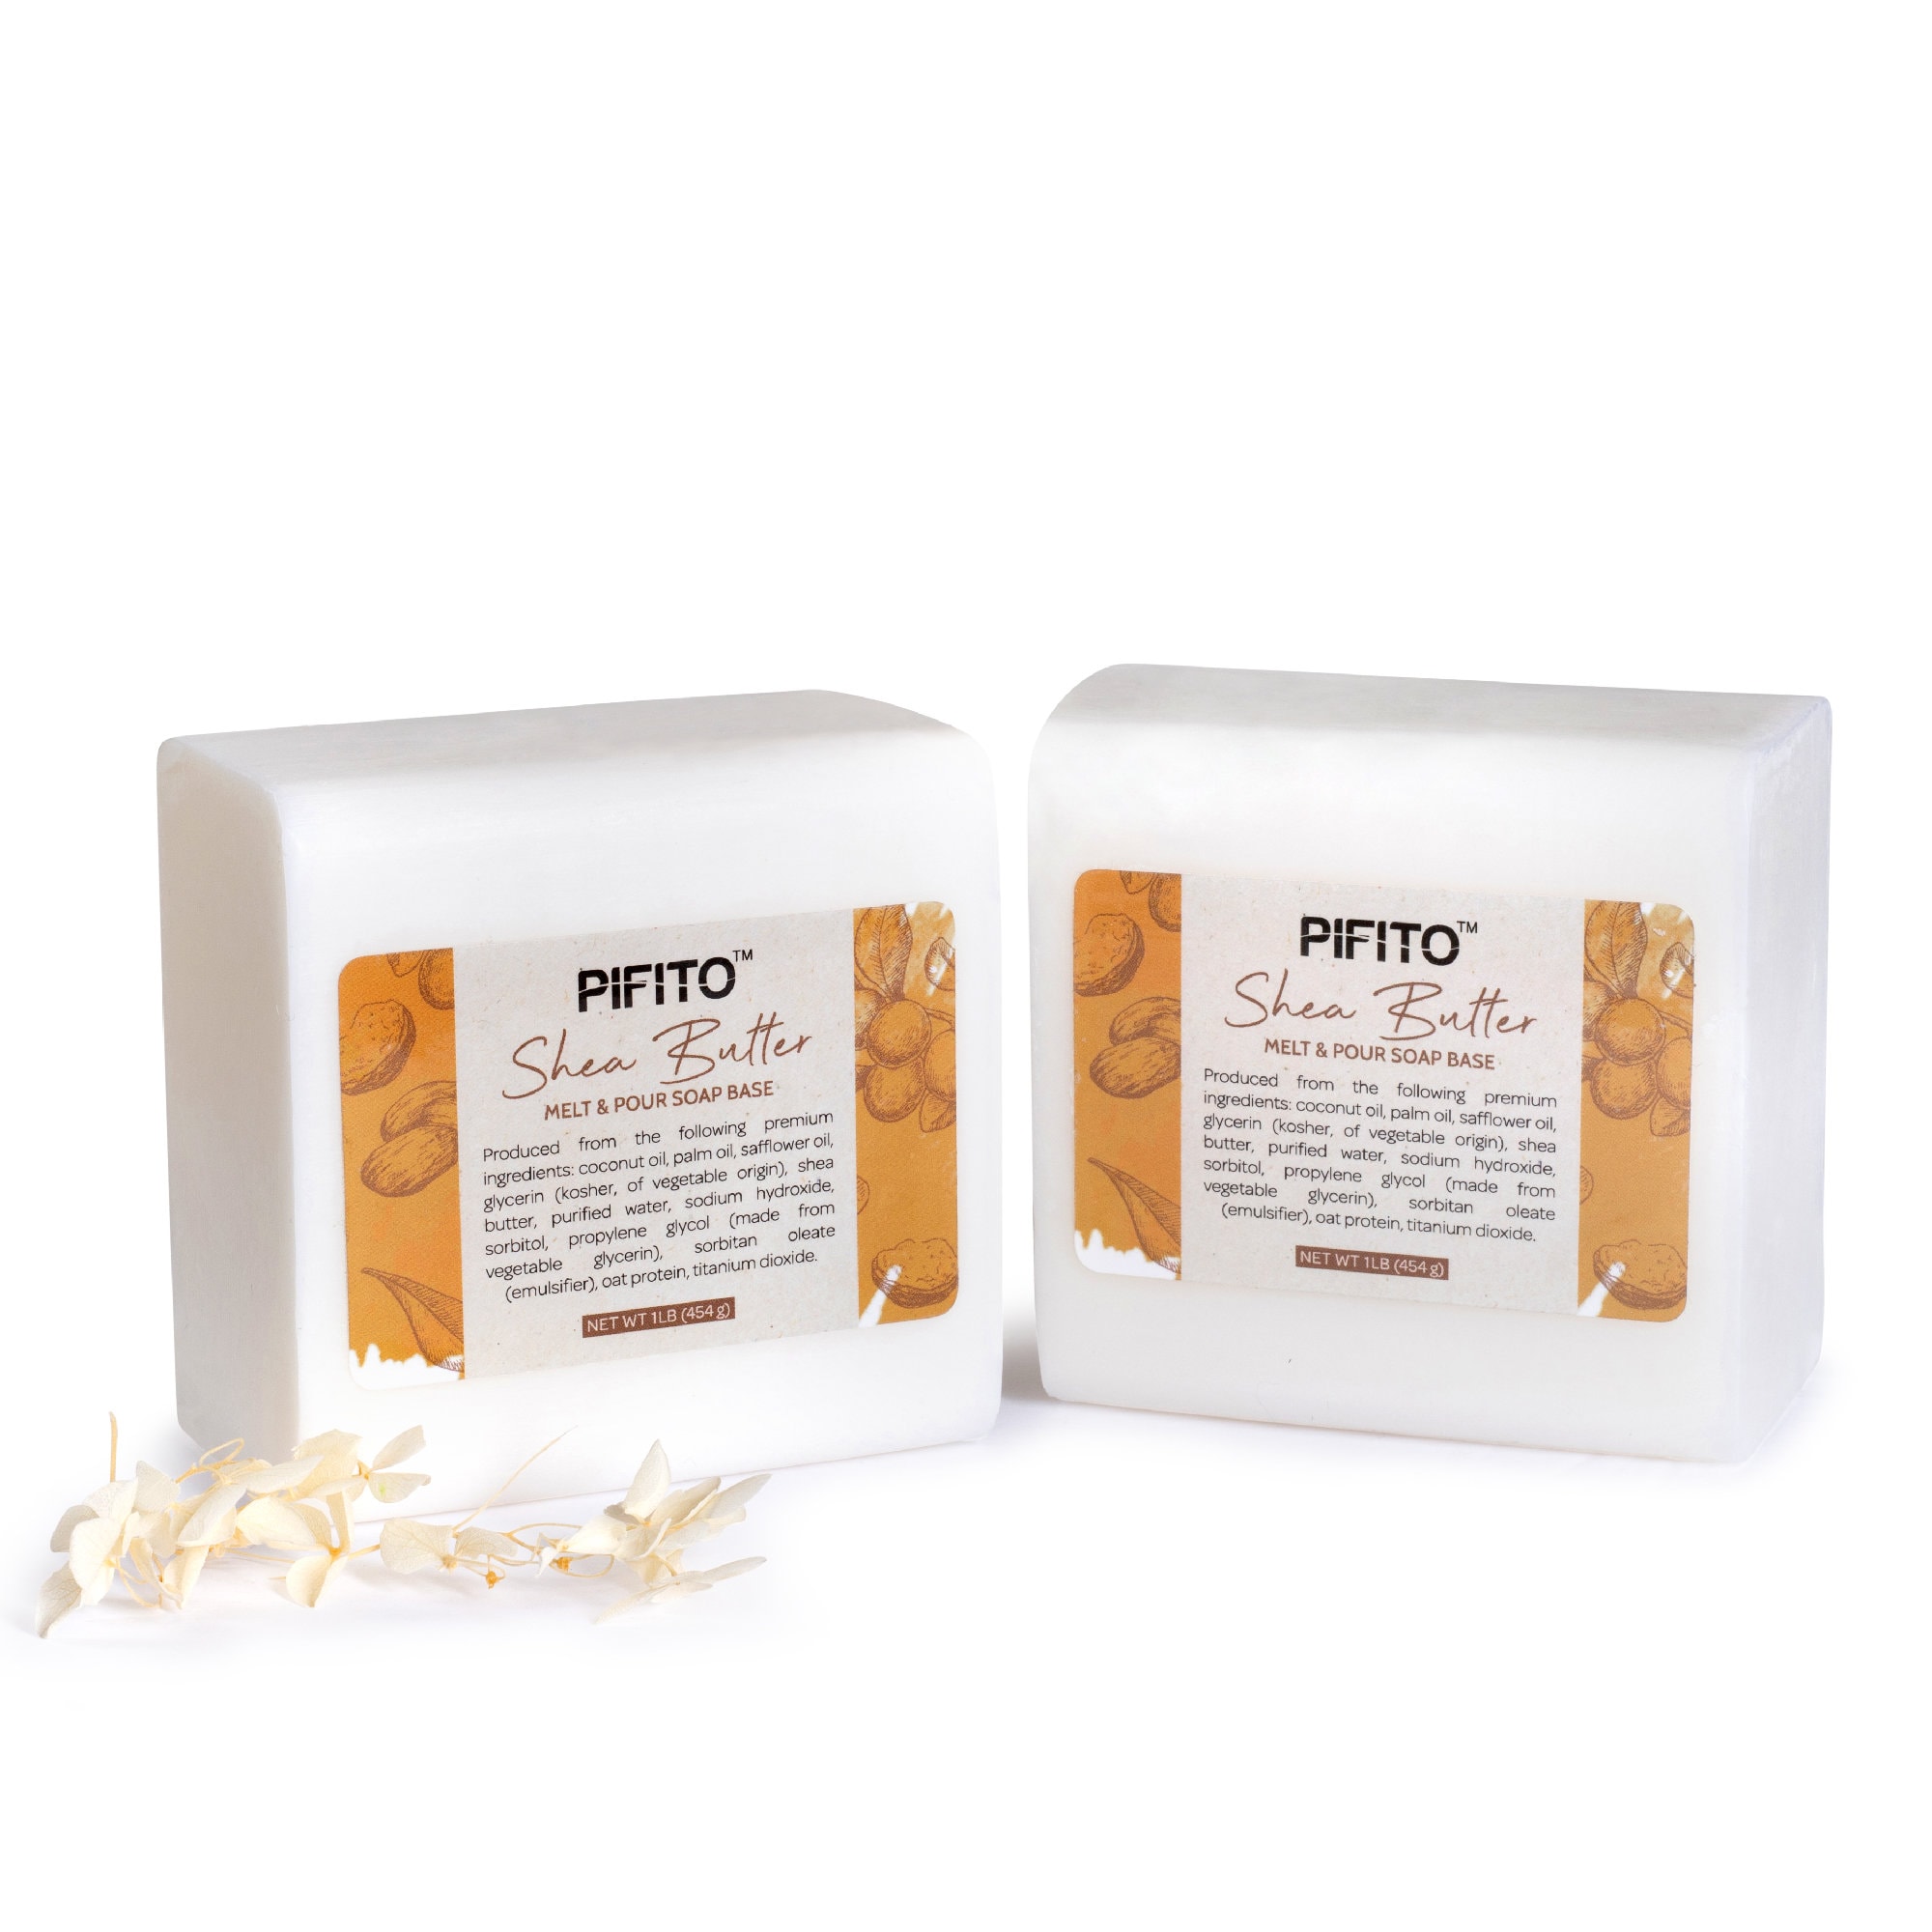 Pifito Shea Butter Melt and Pour Soap Base (2 lb) Premium 100% Natural Glycerin Soap Base Luxurious Soap Making Supplies